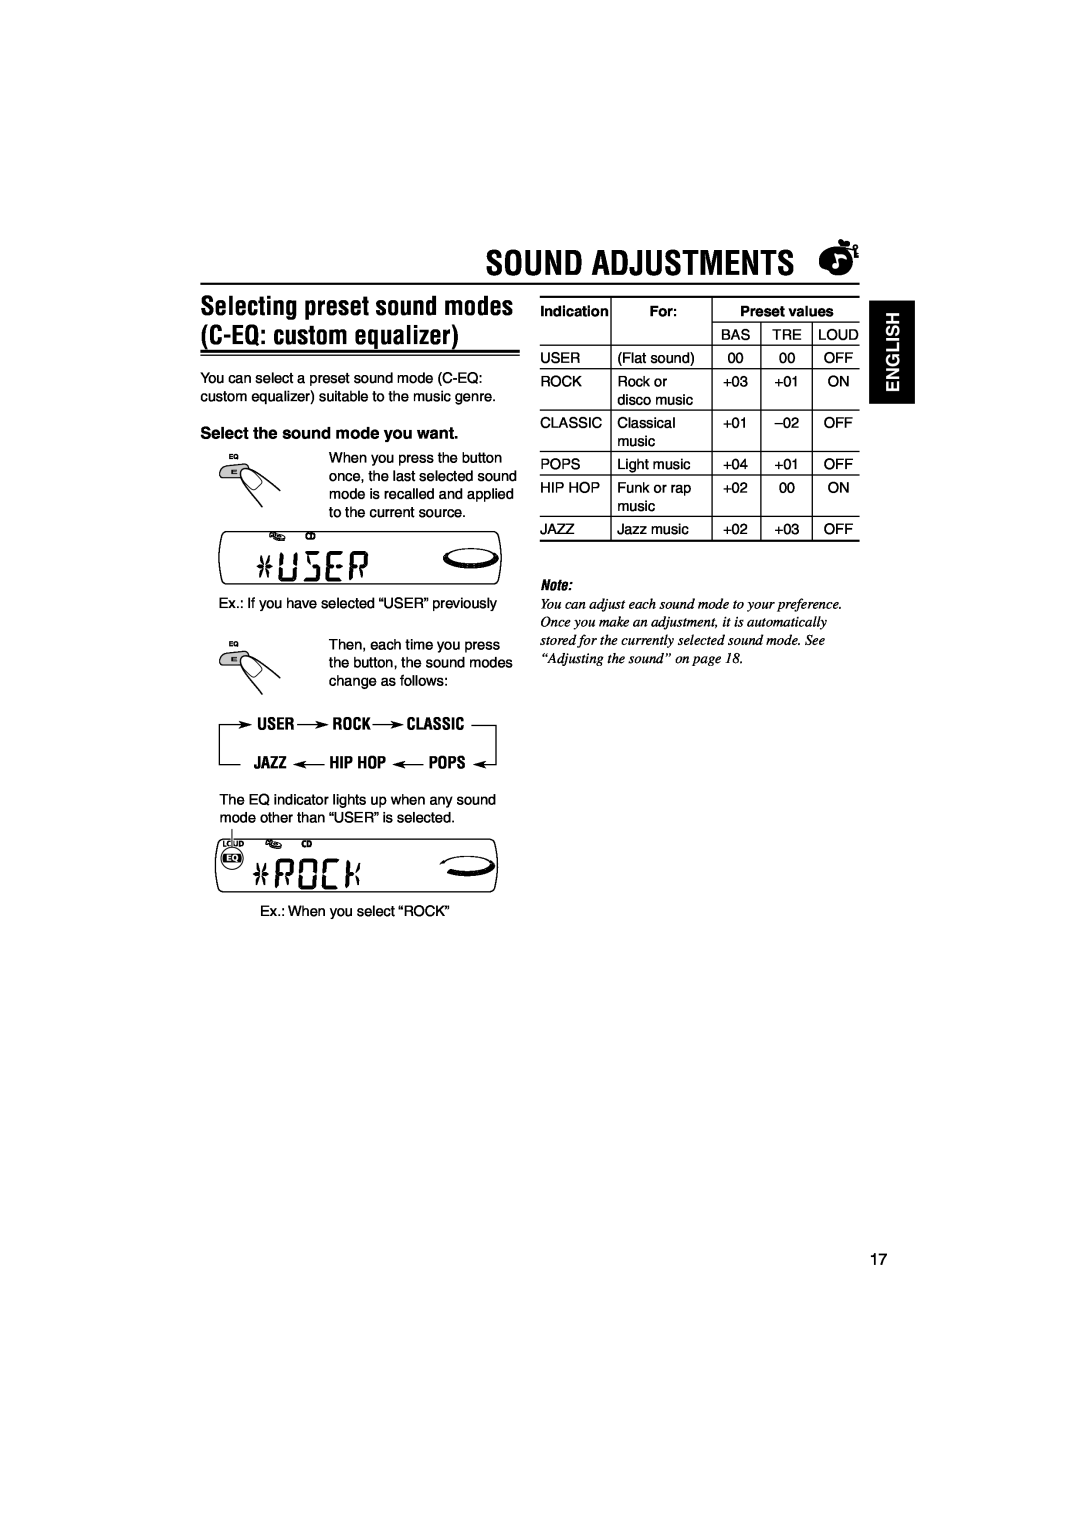 JVC KD-SC800, KD-S790 manual Sound Adjustments, English, Select the sound mode you want, User Rock Classic Jazz Hip Hop Pops 